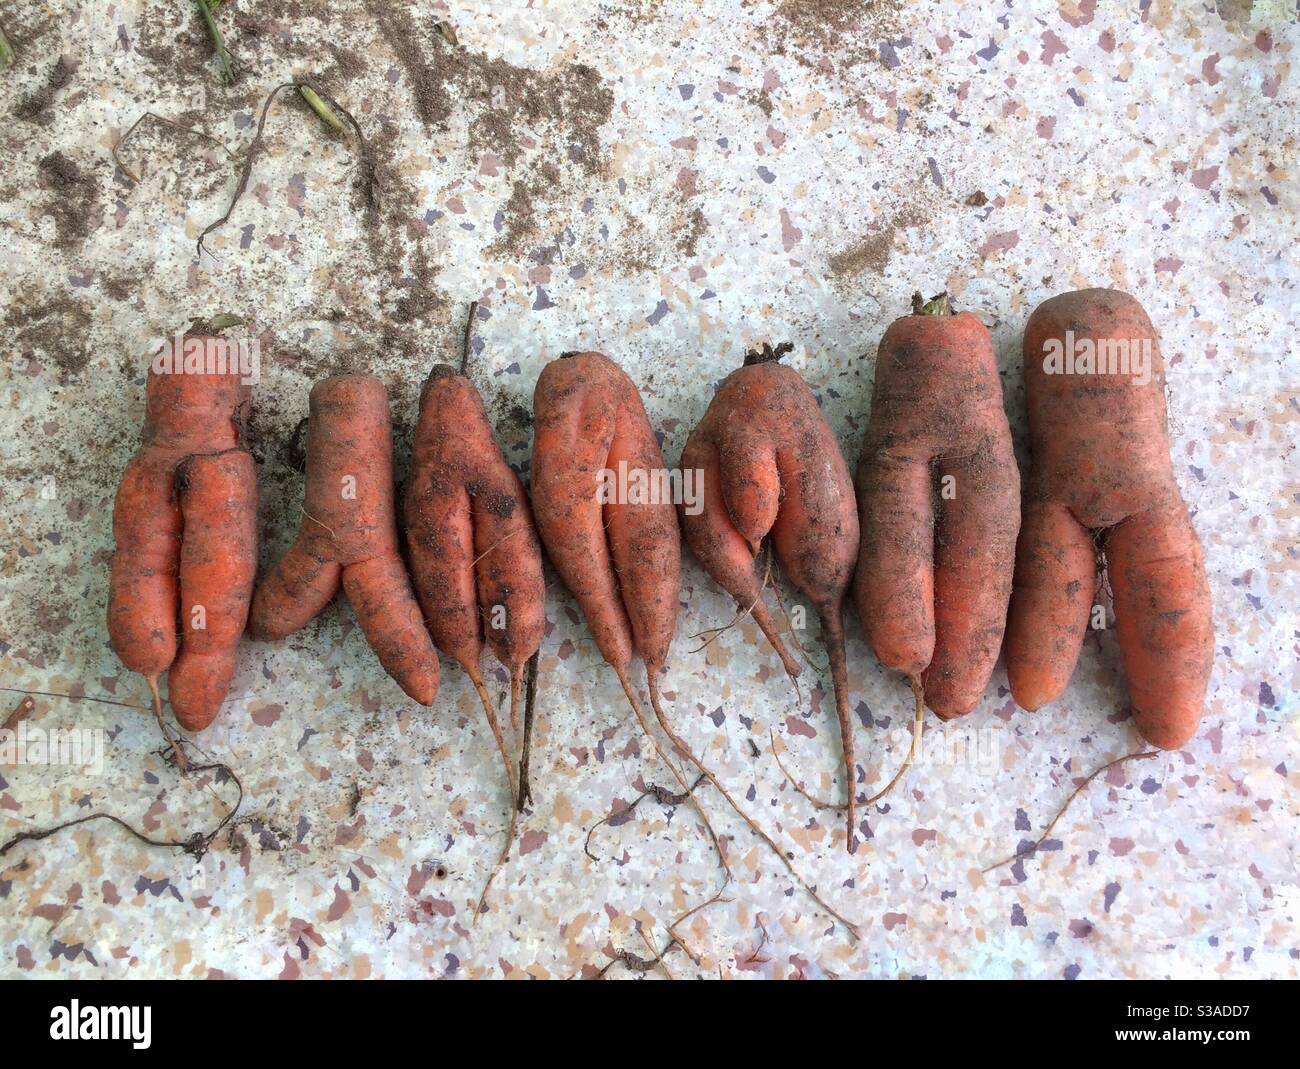 A selection of rude looking carrots Stock Photo